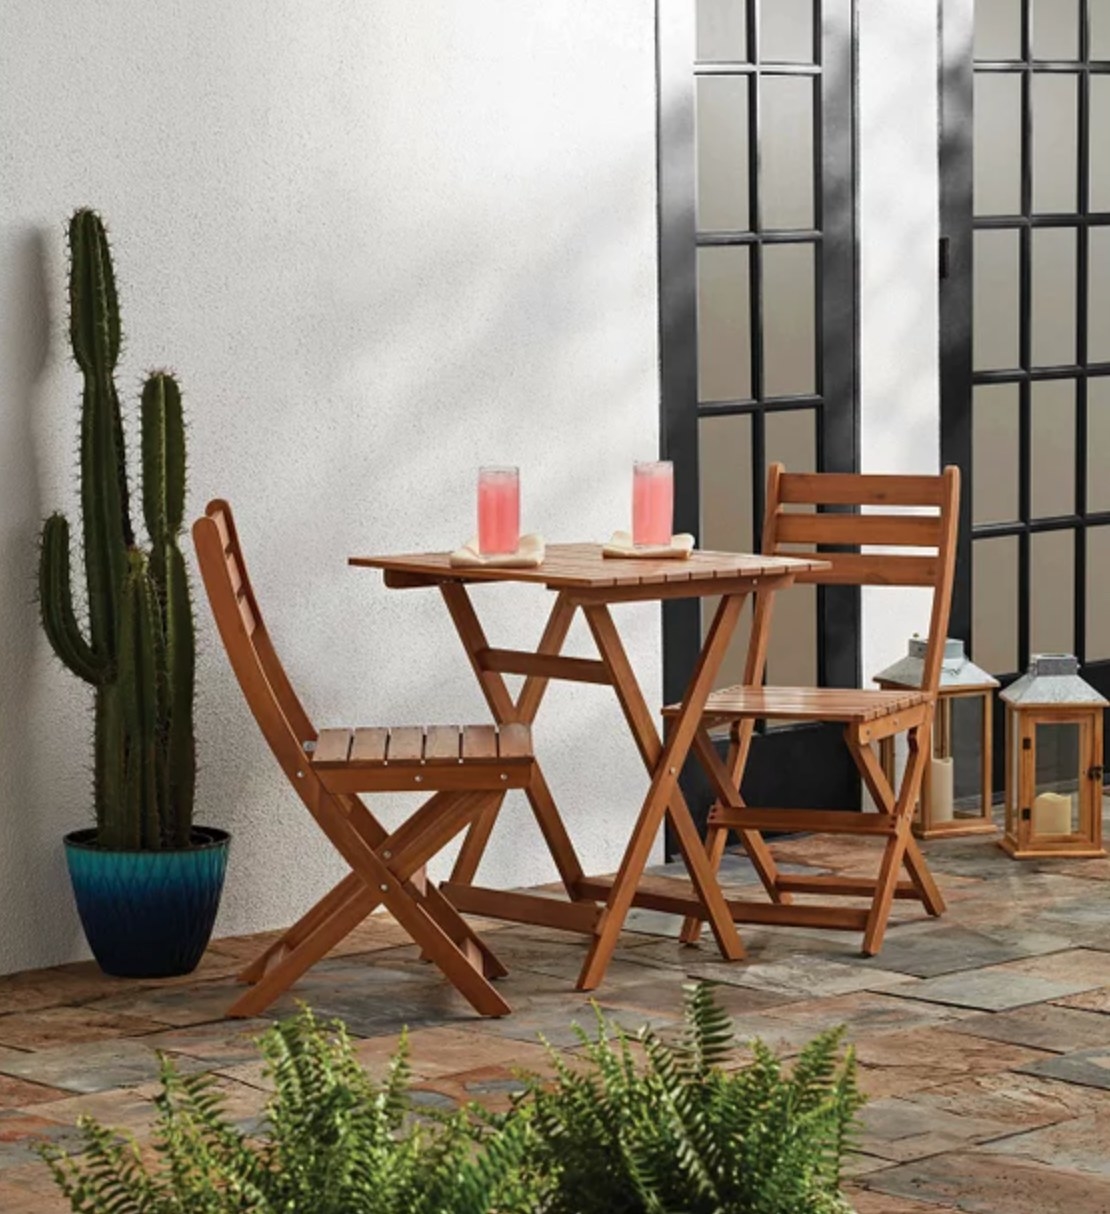 the medium wood table and chairs in a decorated patio space